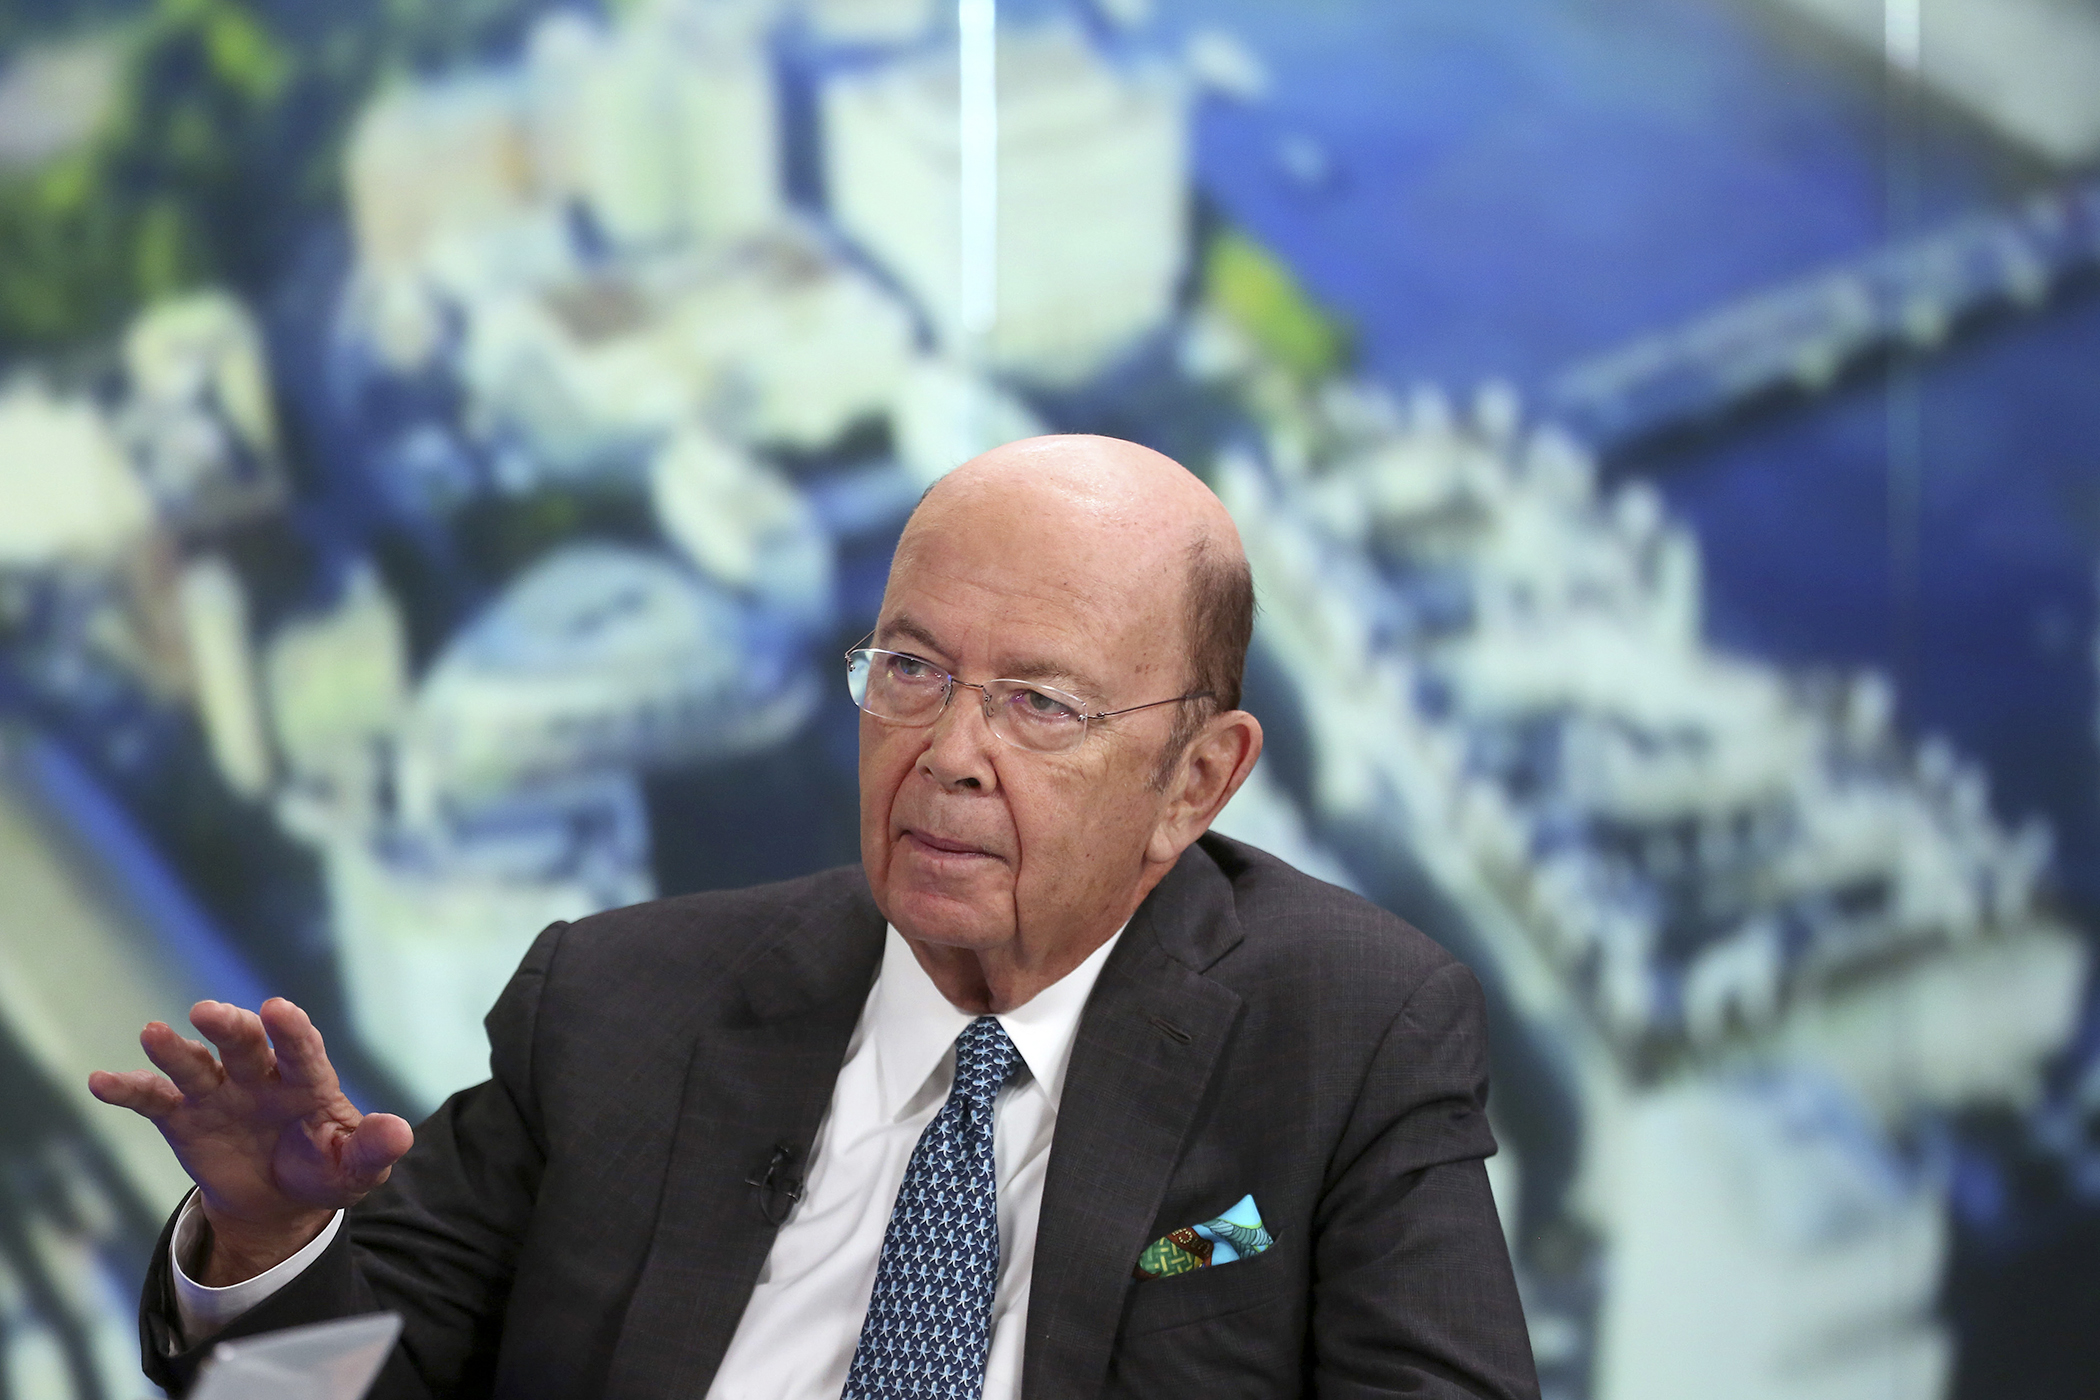 Wilbur Ross, U.S. billionaire, chairman and chief executive officer of WL Ross & Co. LLC, gestures as he speaks during a Bloomberg Television interview in London, U.K., on Tuesday, Nov. 18, 2014. Ross, a turnaround financier, ordered four very large crude carriers from Daewoo Shipbuilding & Marine Engineering Co. due in 2016 and 2017 in a joint venture with AWilhelmsen AS, an Oslo-based shipping company.